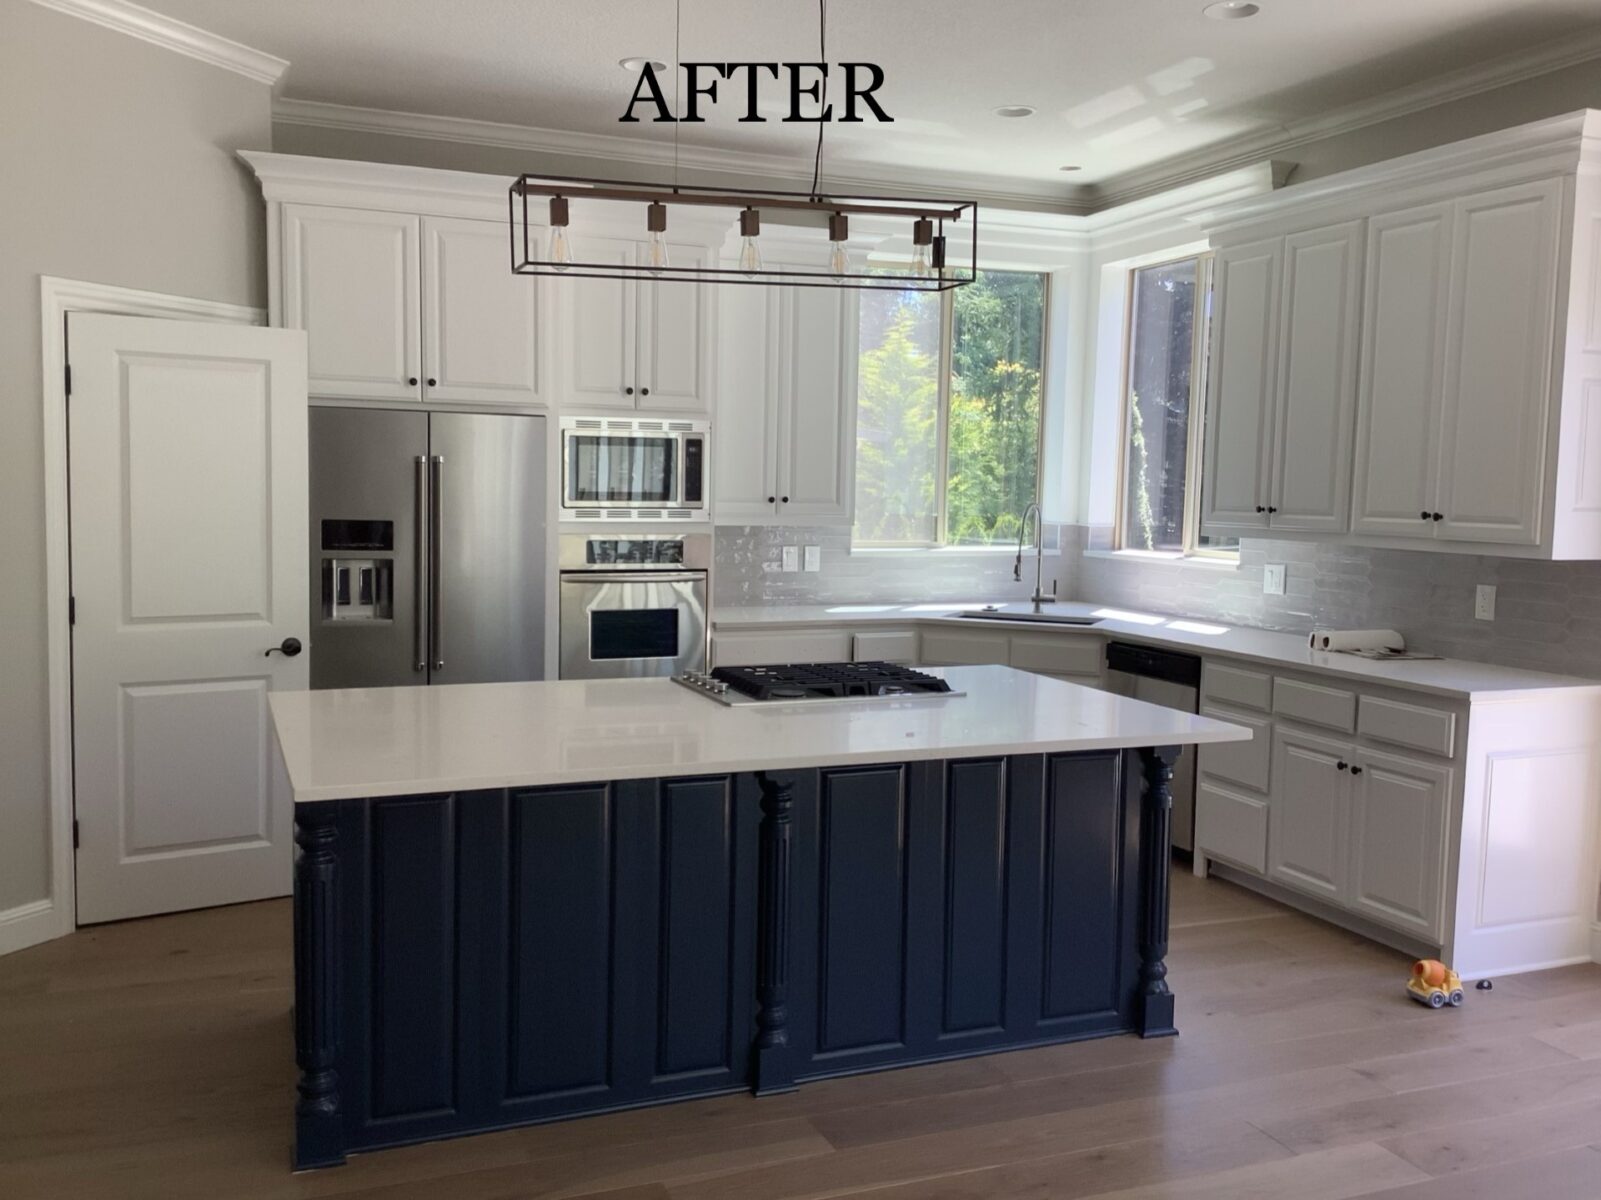 Renovated kitchen with white cabinets, stainless steel appliances, and a blue island.